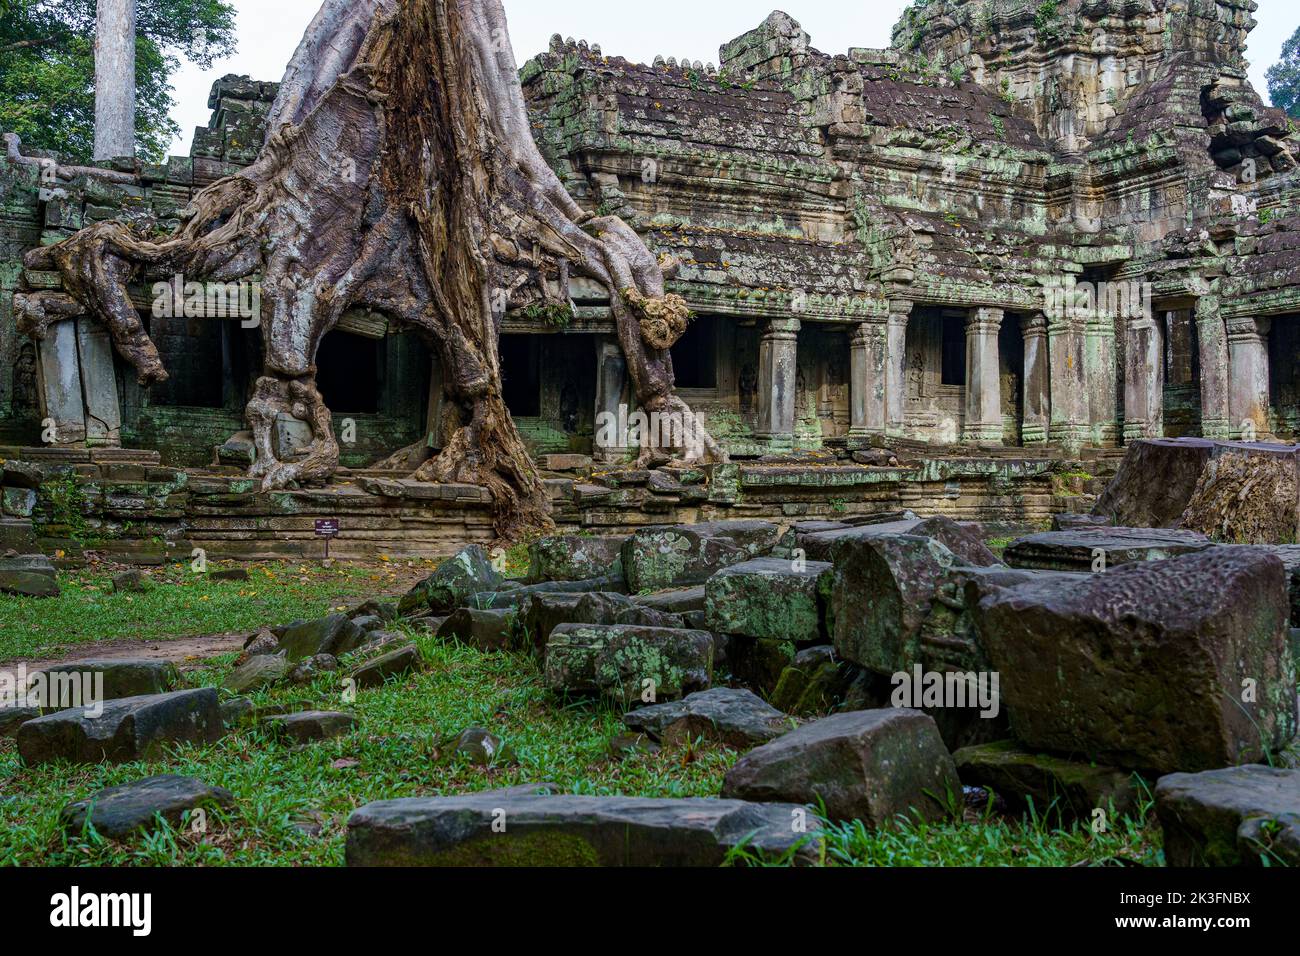 Cambodia. Siem Reap. The archaeological park of Angkor. Tree root of banyan tree overgrowing parts of ancient Preah Khan 12th century Hindu temple Stock Photo